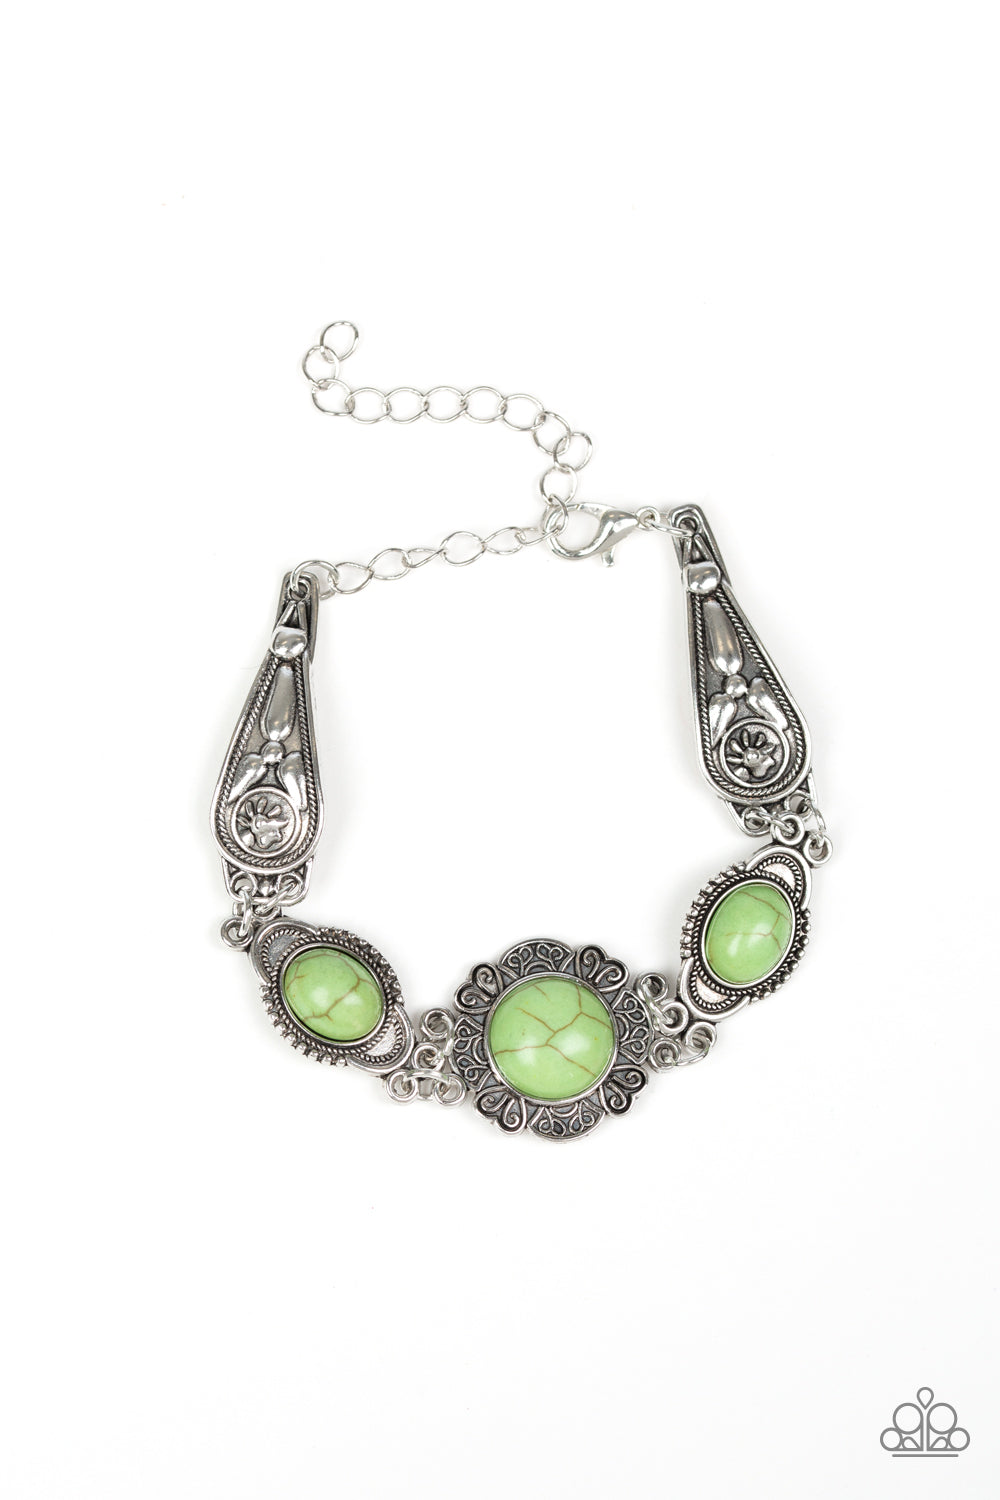 Serenely Southern - Green Paparazzi Jewelry